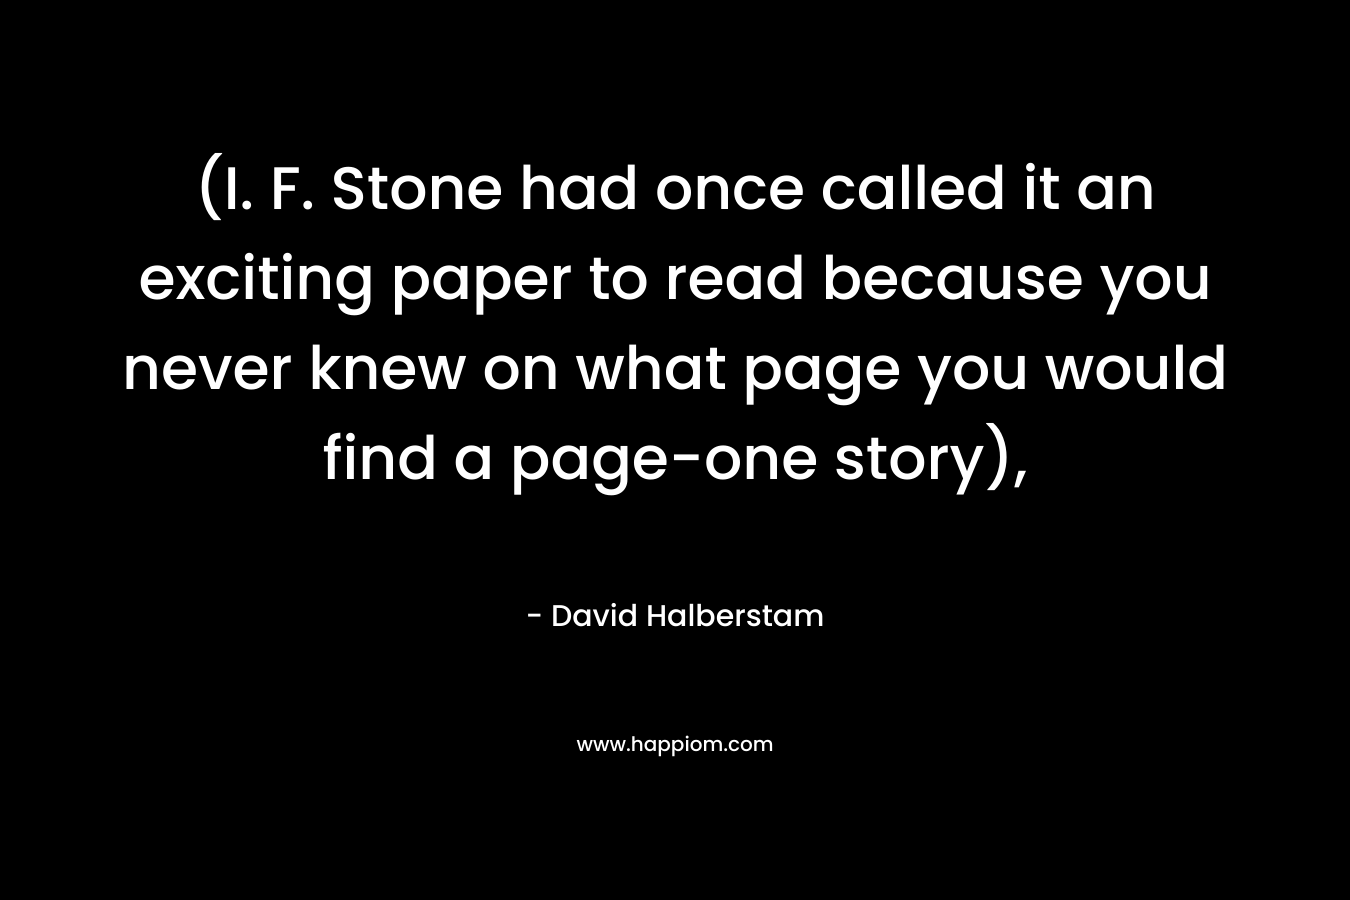 (I. F. Stone had once called it an exciting paper to read because you never knew on what page you would find a page-one story),